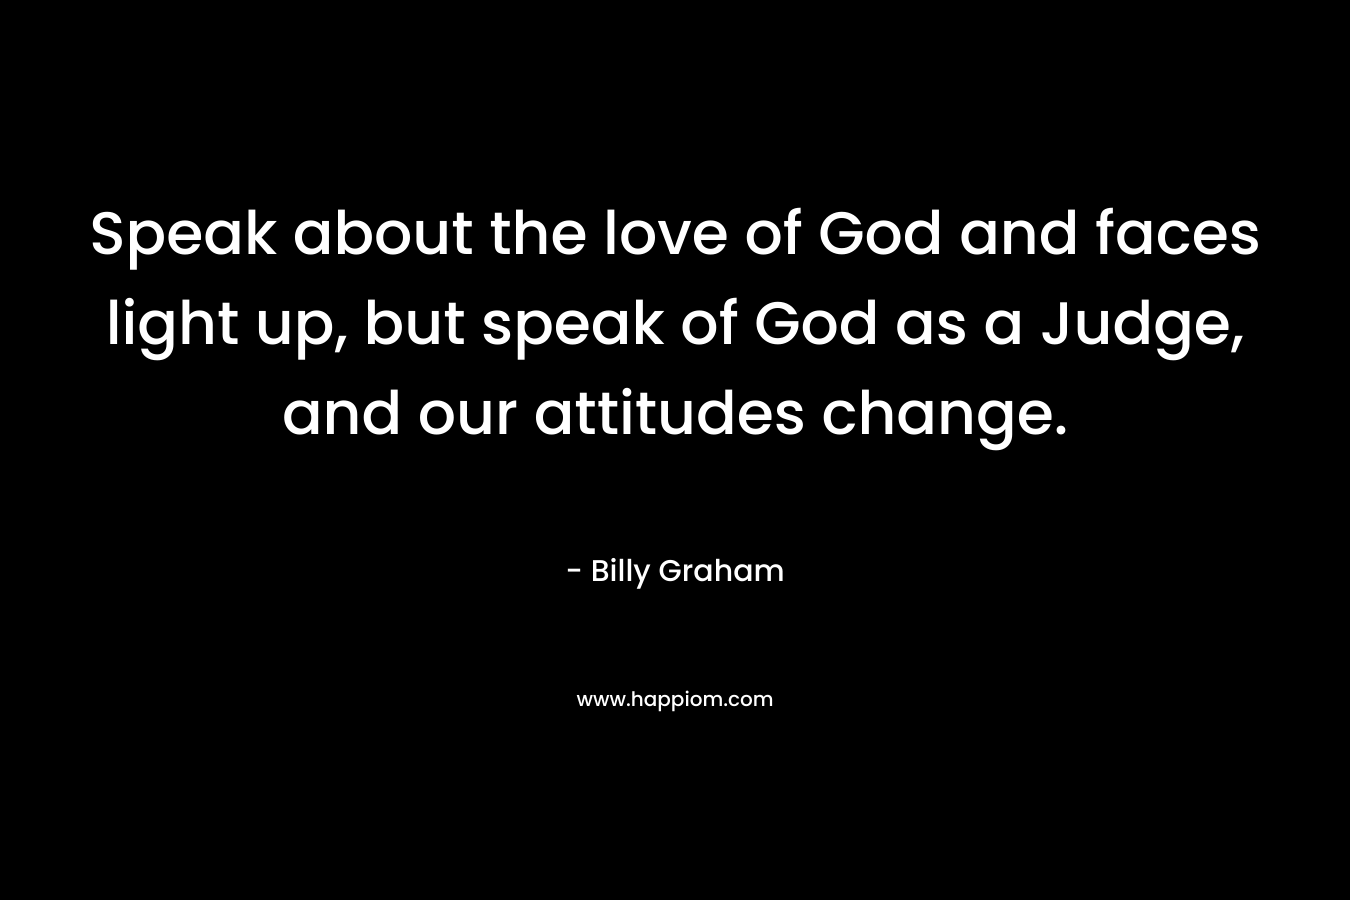 Speak about the love of God and faces light up, but speak of God as a Judge, and our attitudes change. – Billy Graham